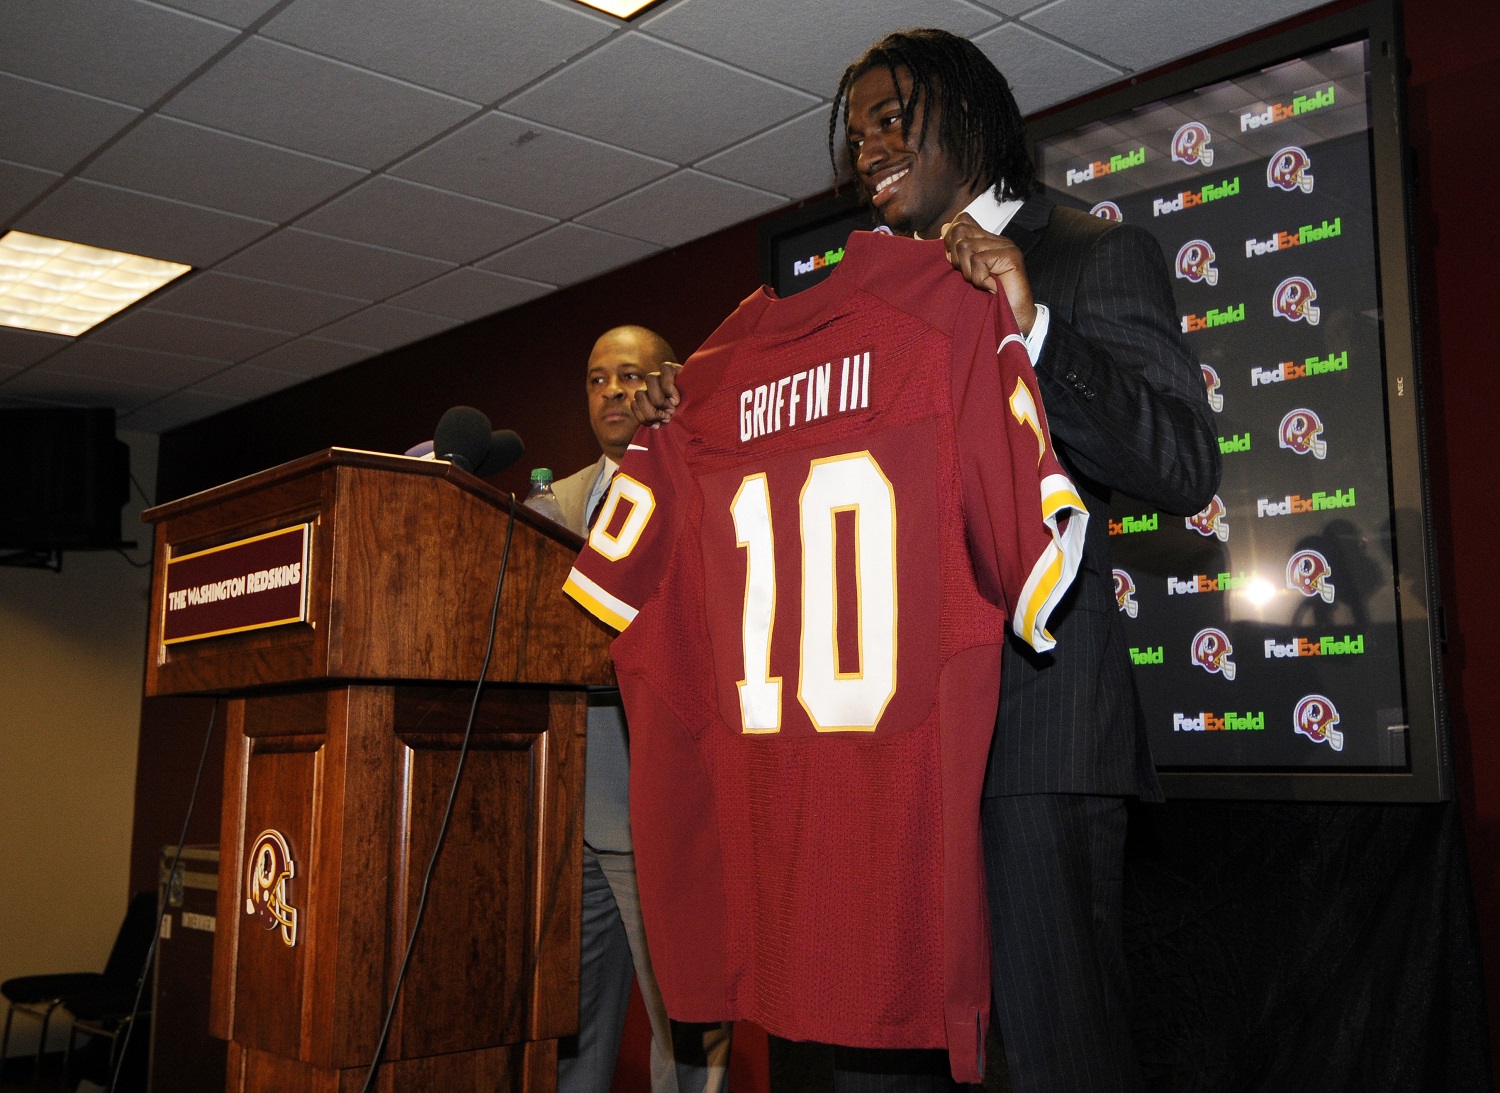 Washington Redskins first round NFL football draft pick, Robert Griffin III, poses with a Redskins jersey at a press conference, Saturday, April 28, 2012, in Landover, Md. (AP Photo/Nick Wass)